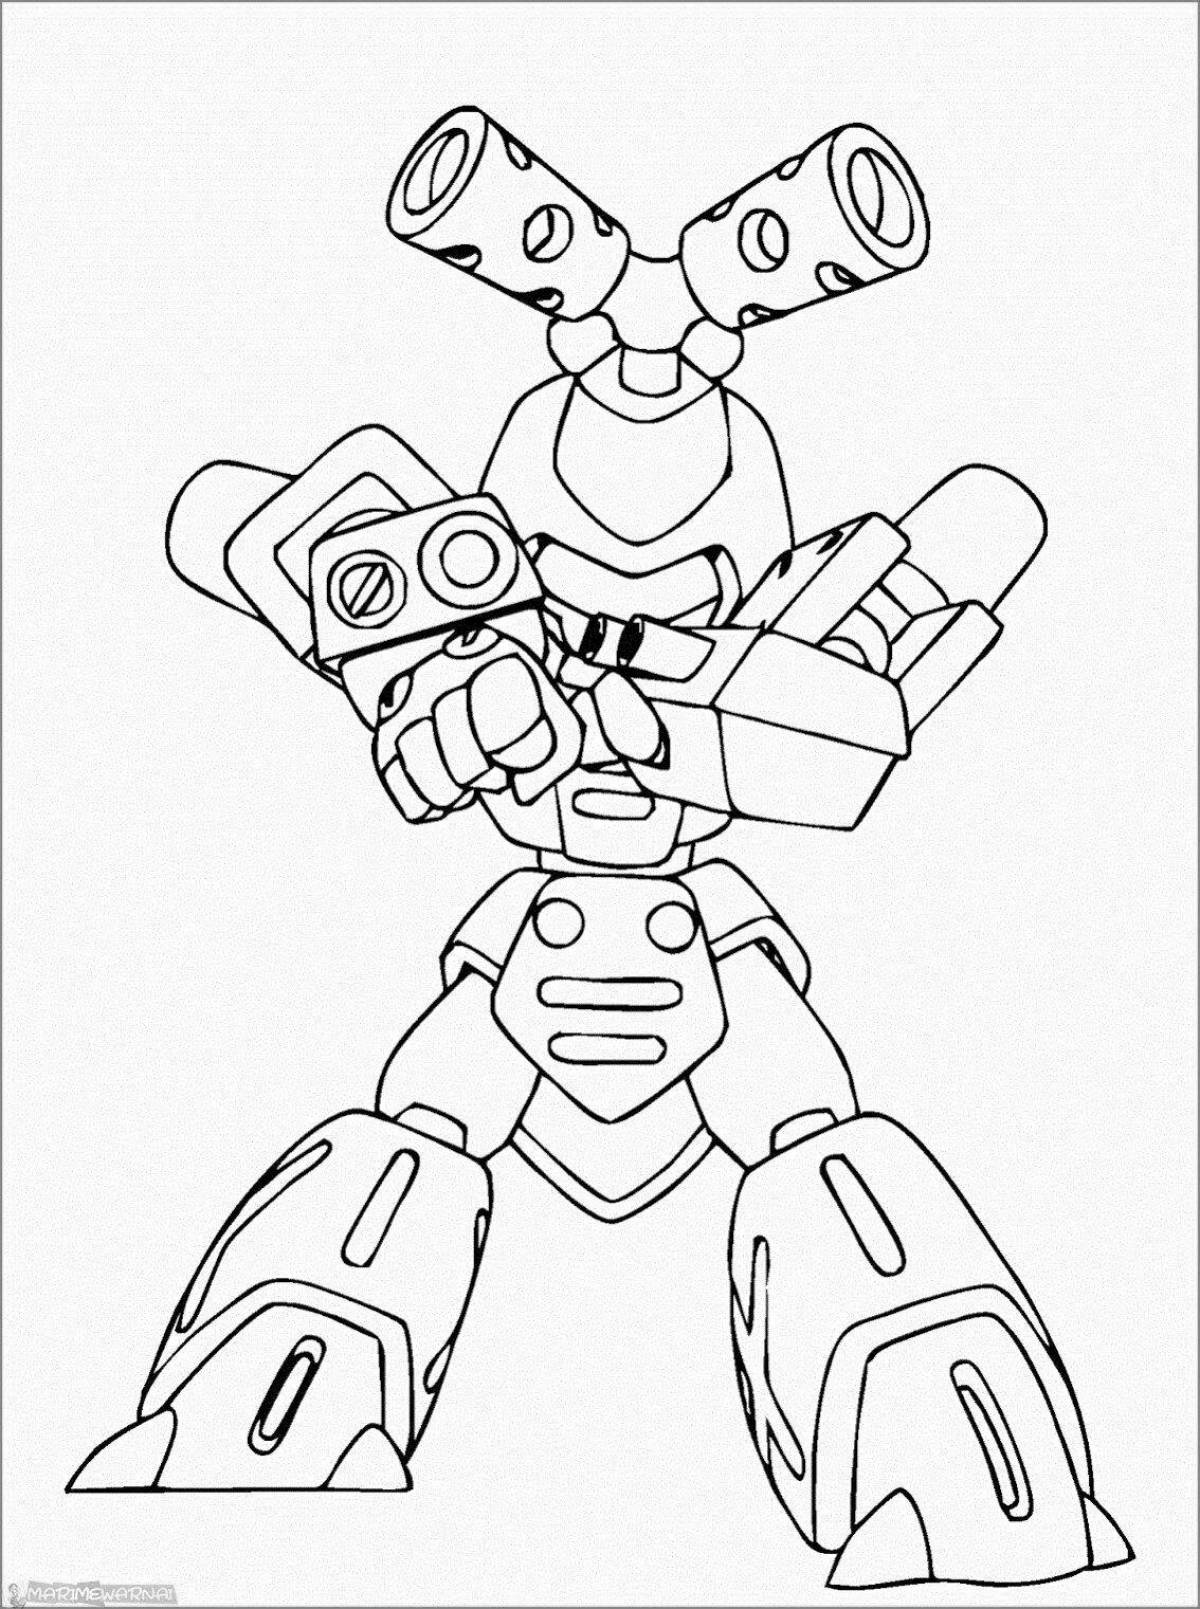 Cute master you tobot coloring page